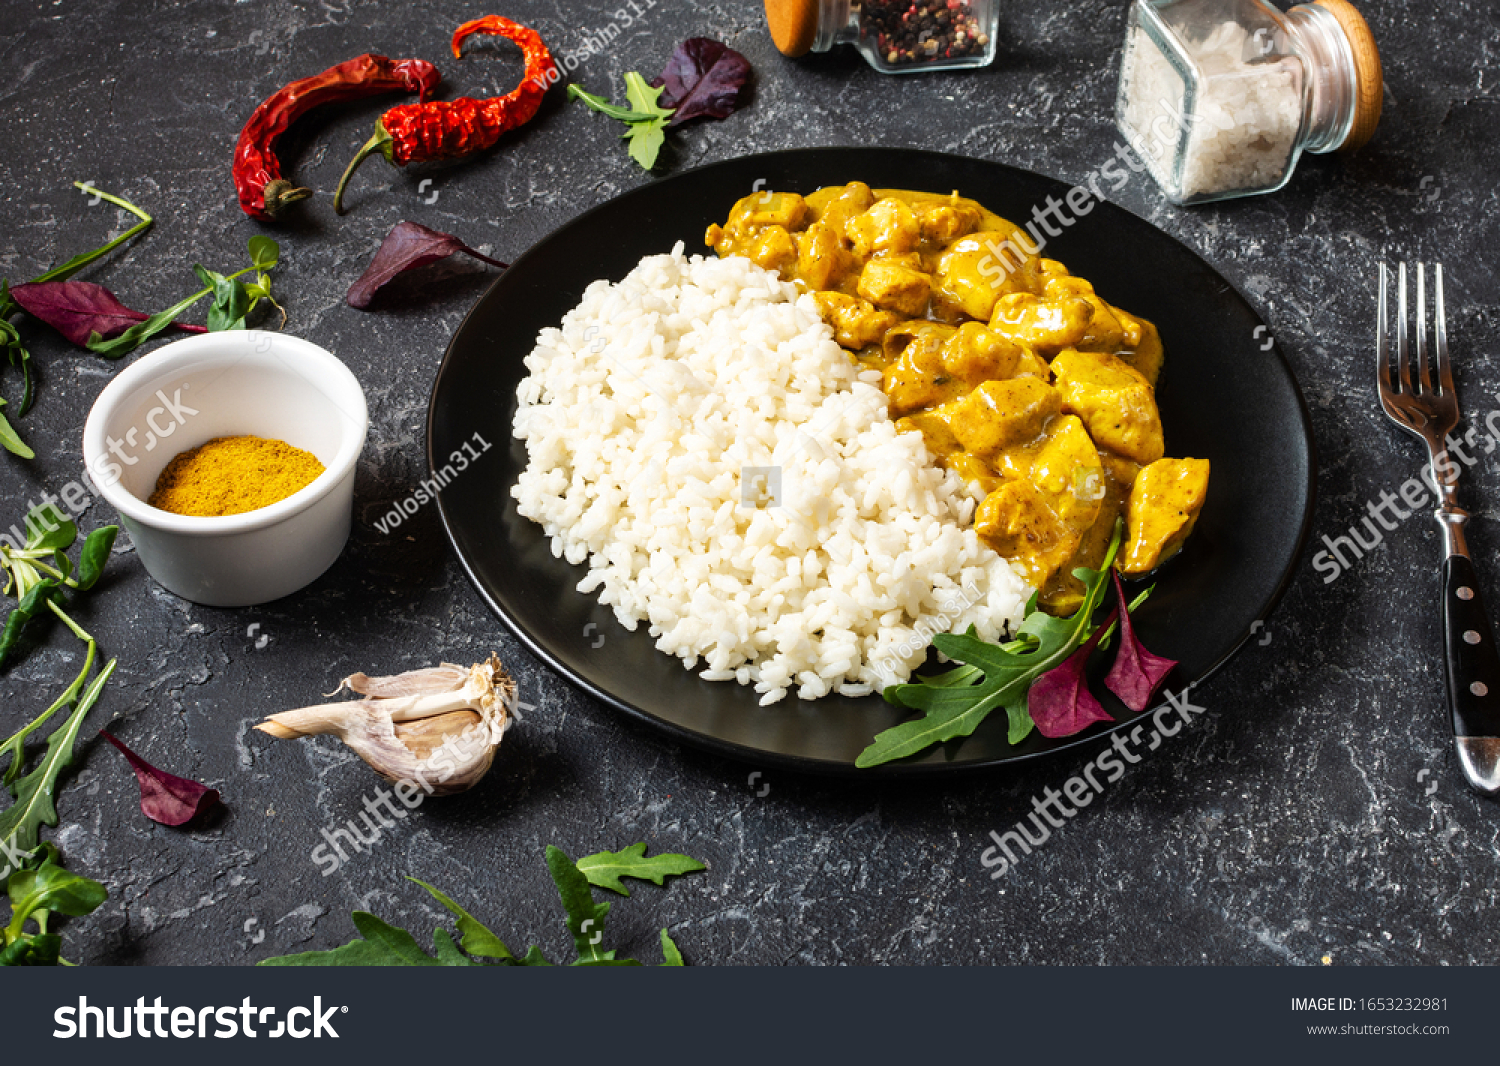 Rice with chicken in curry sauce on plate on black stone background #1653232981